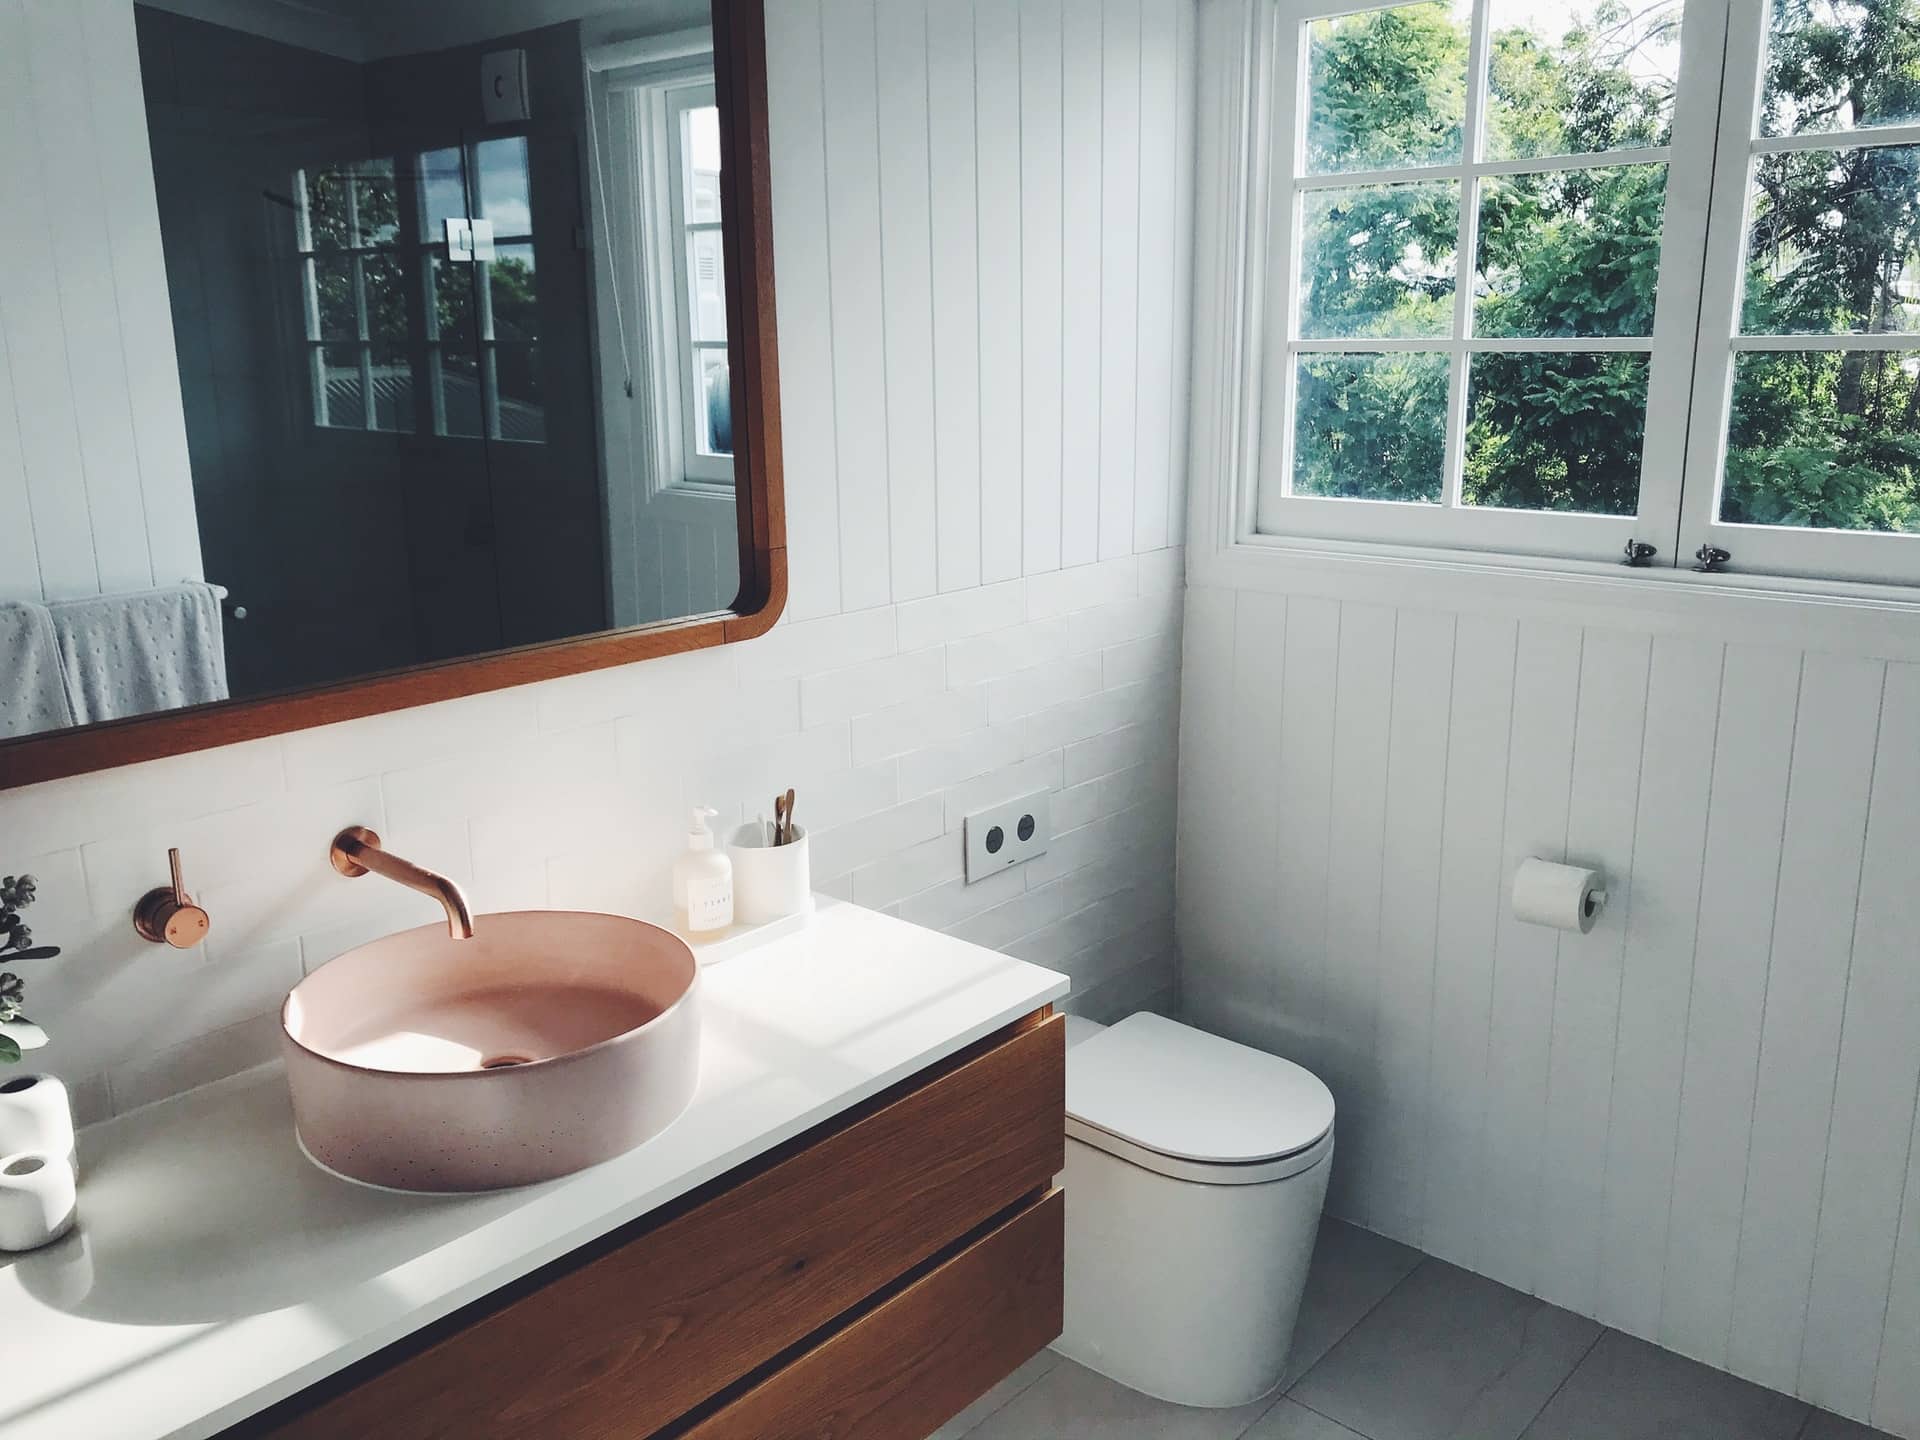 Different Ways You Can Make Your Bathroom More Functional